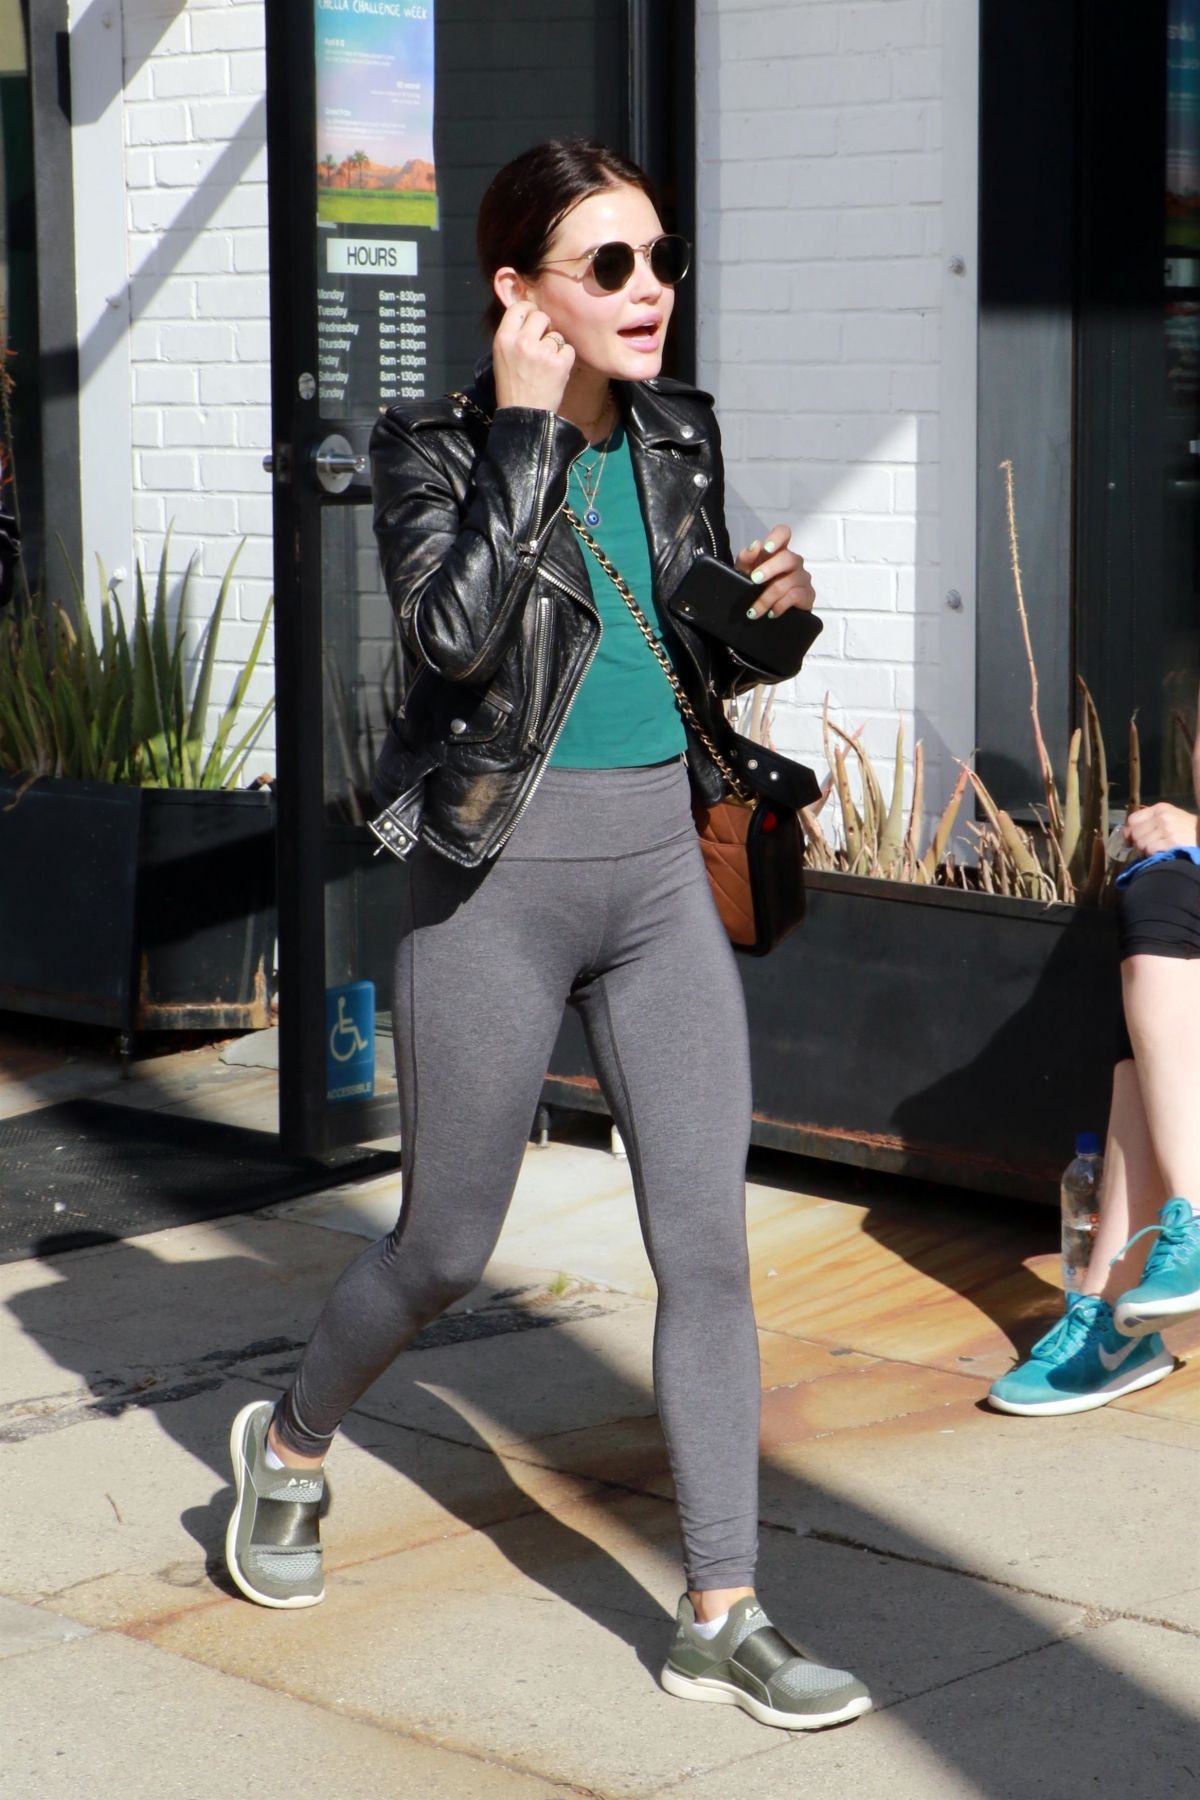 LUCY HALE in Tights Out and About in Studio City 04/05 